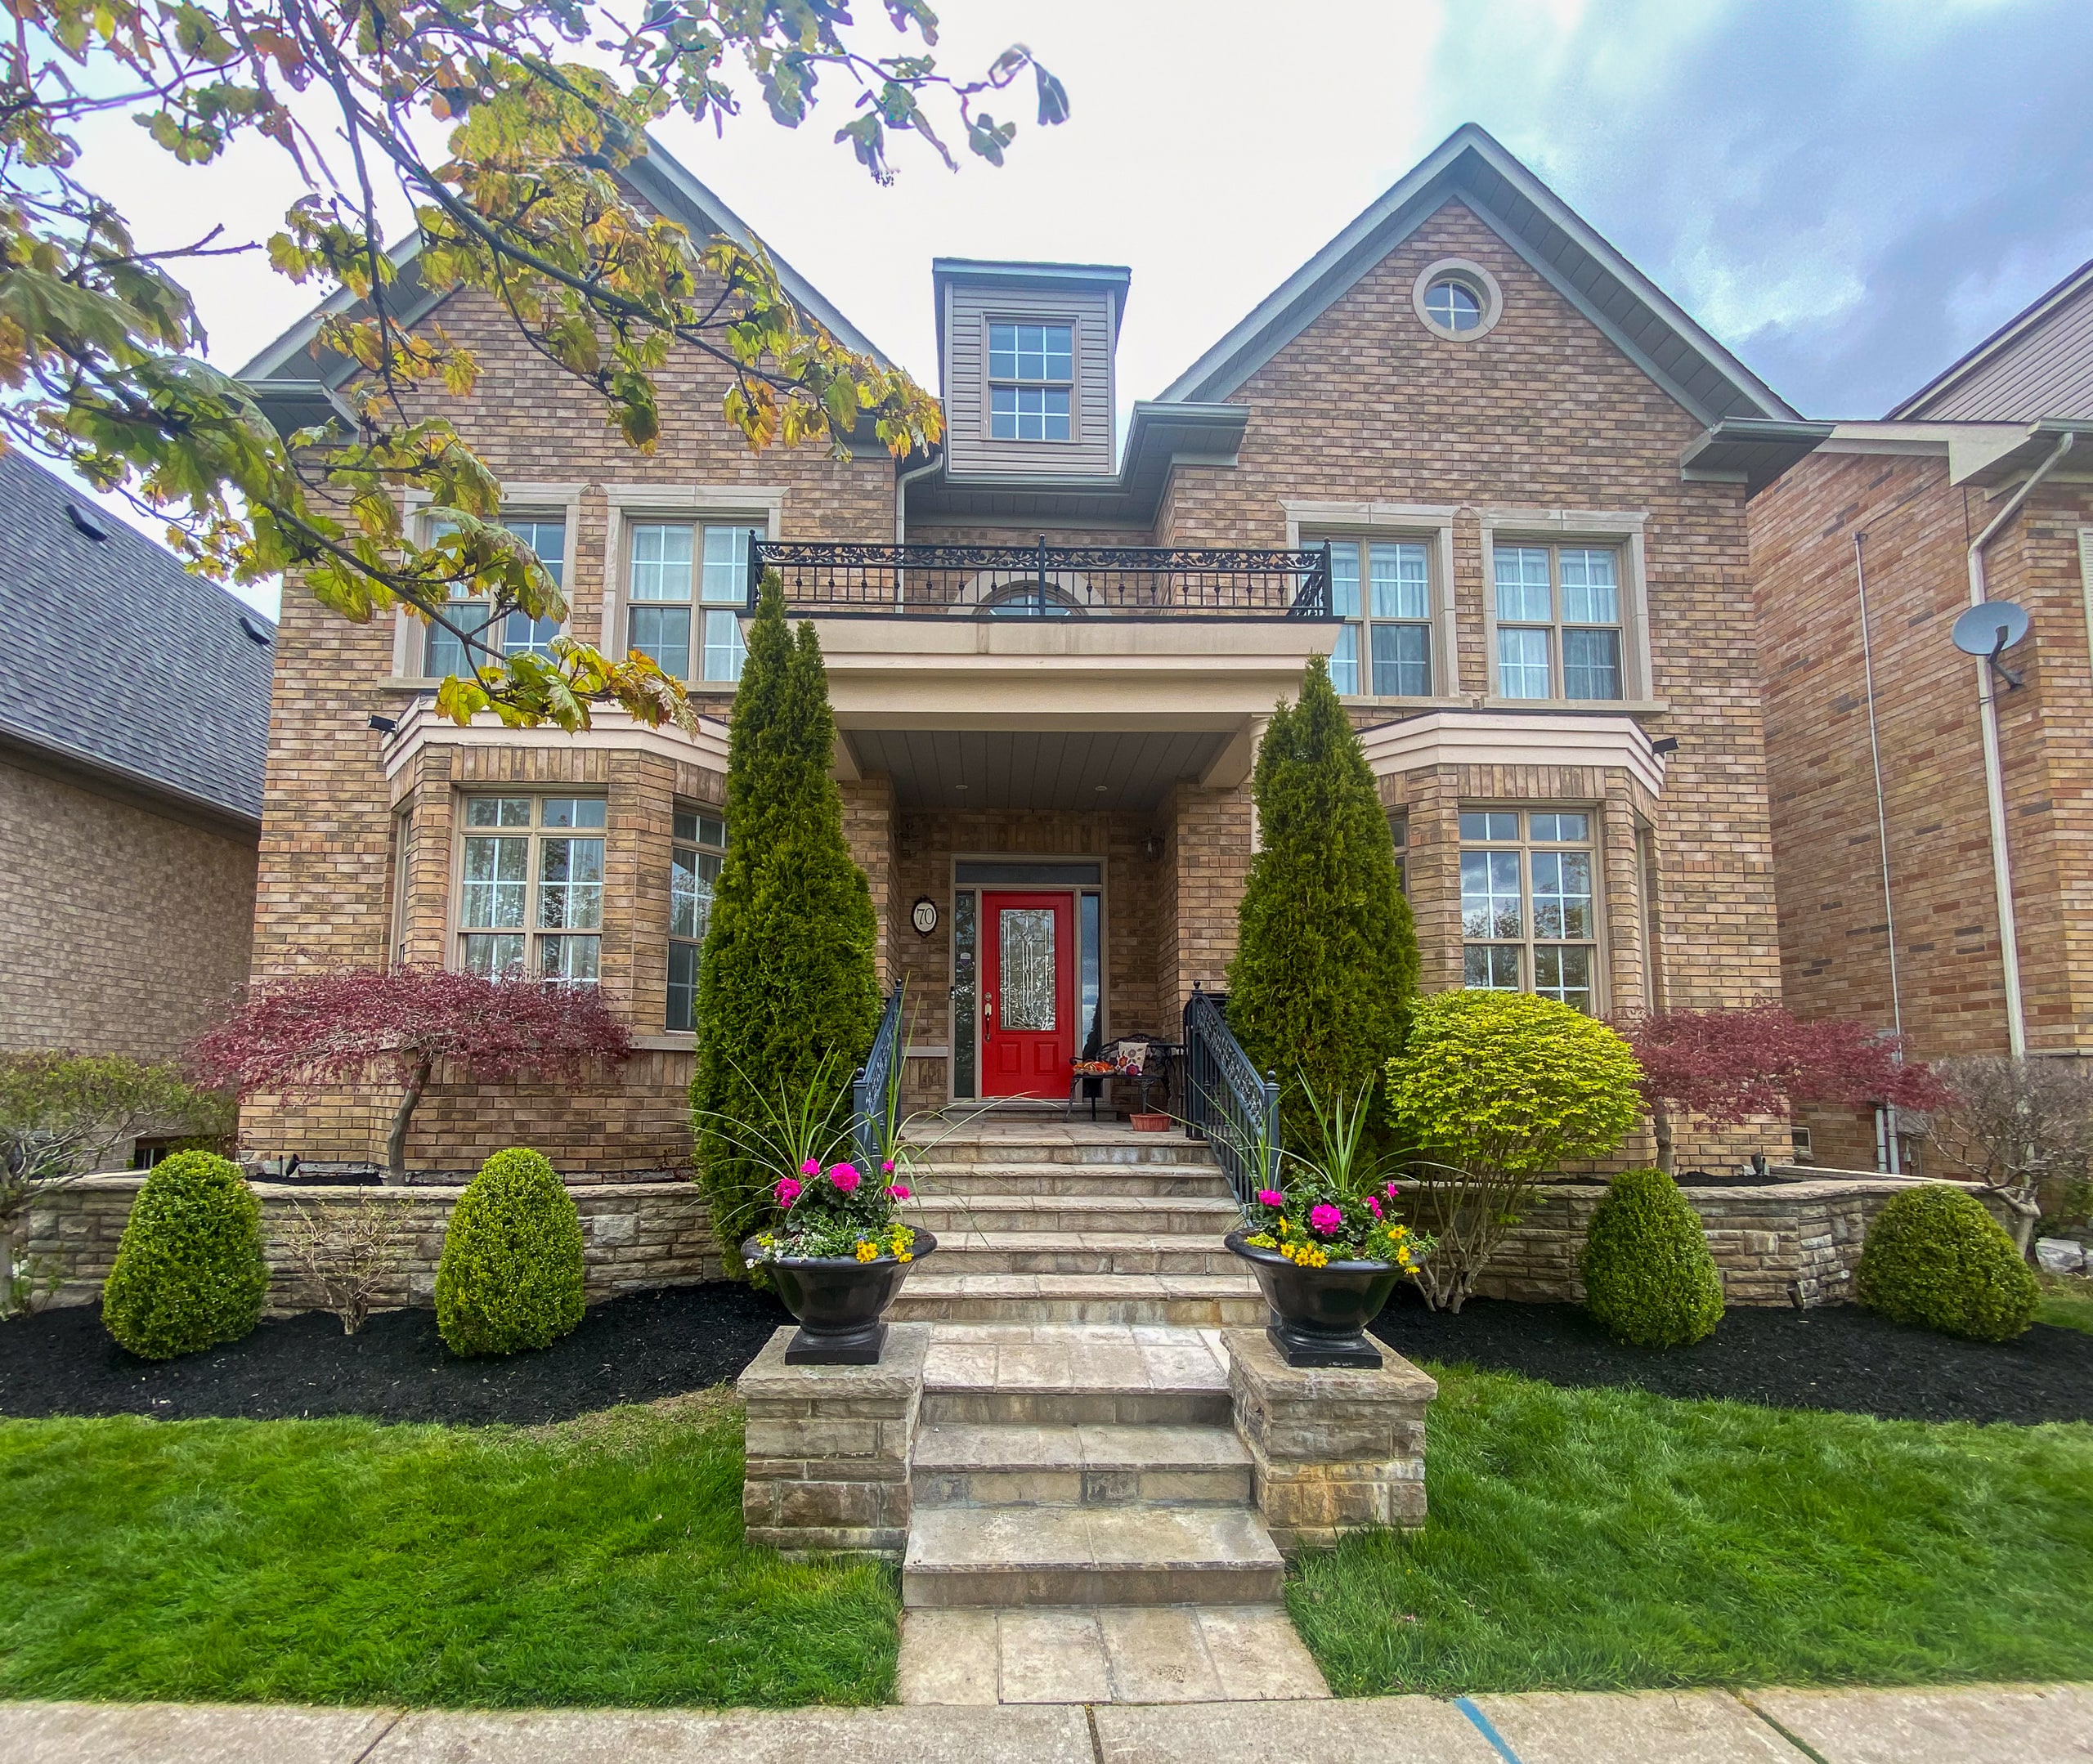 Front of home in the GTA with luxurious gardens and landscaping